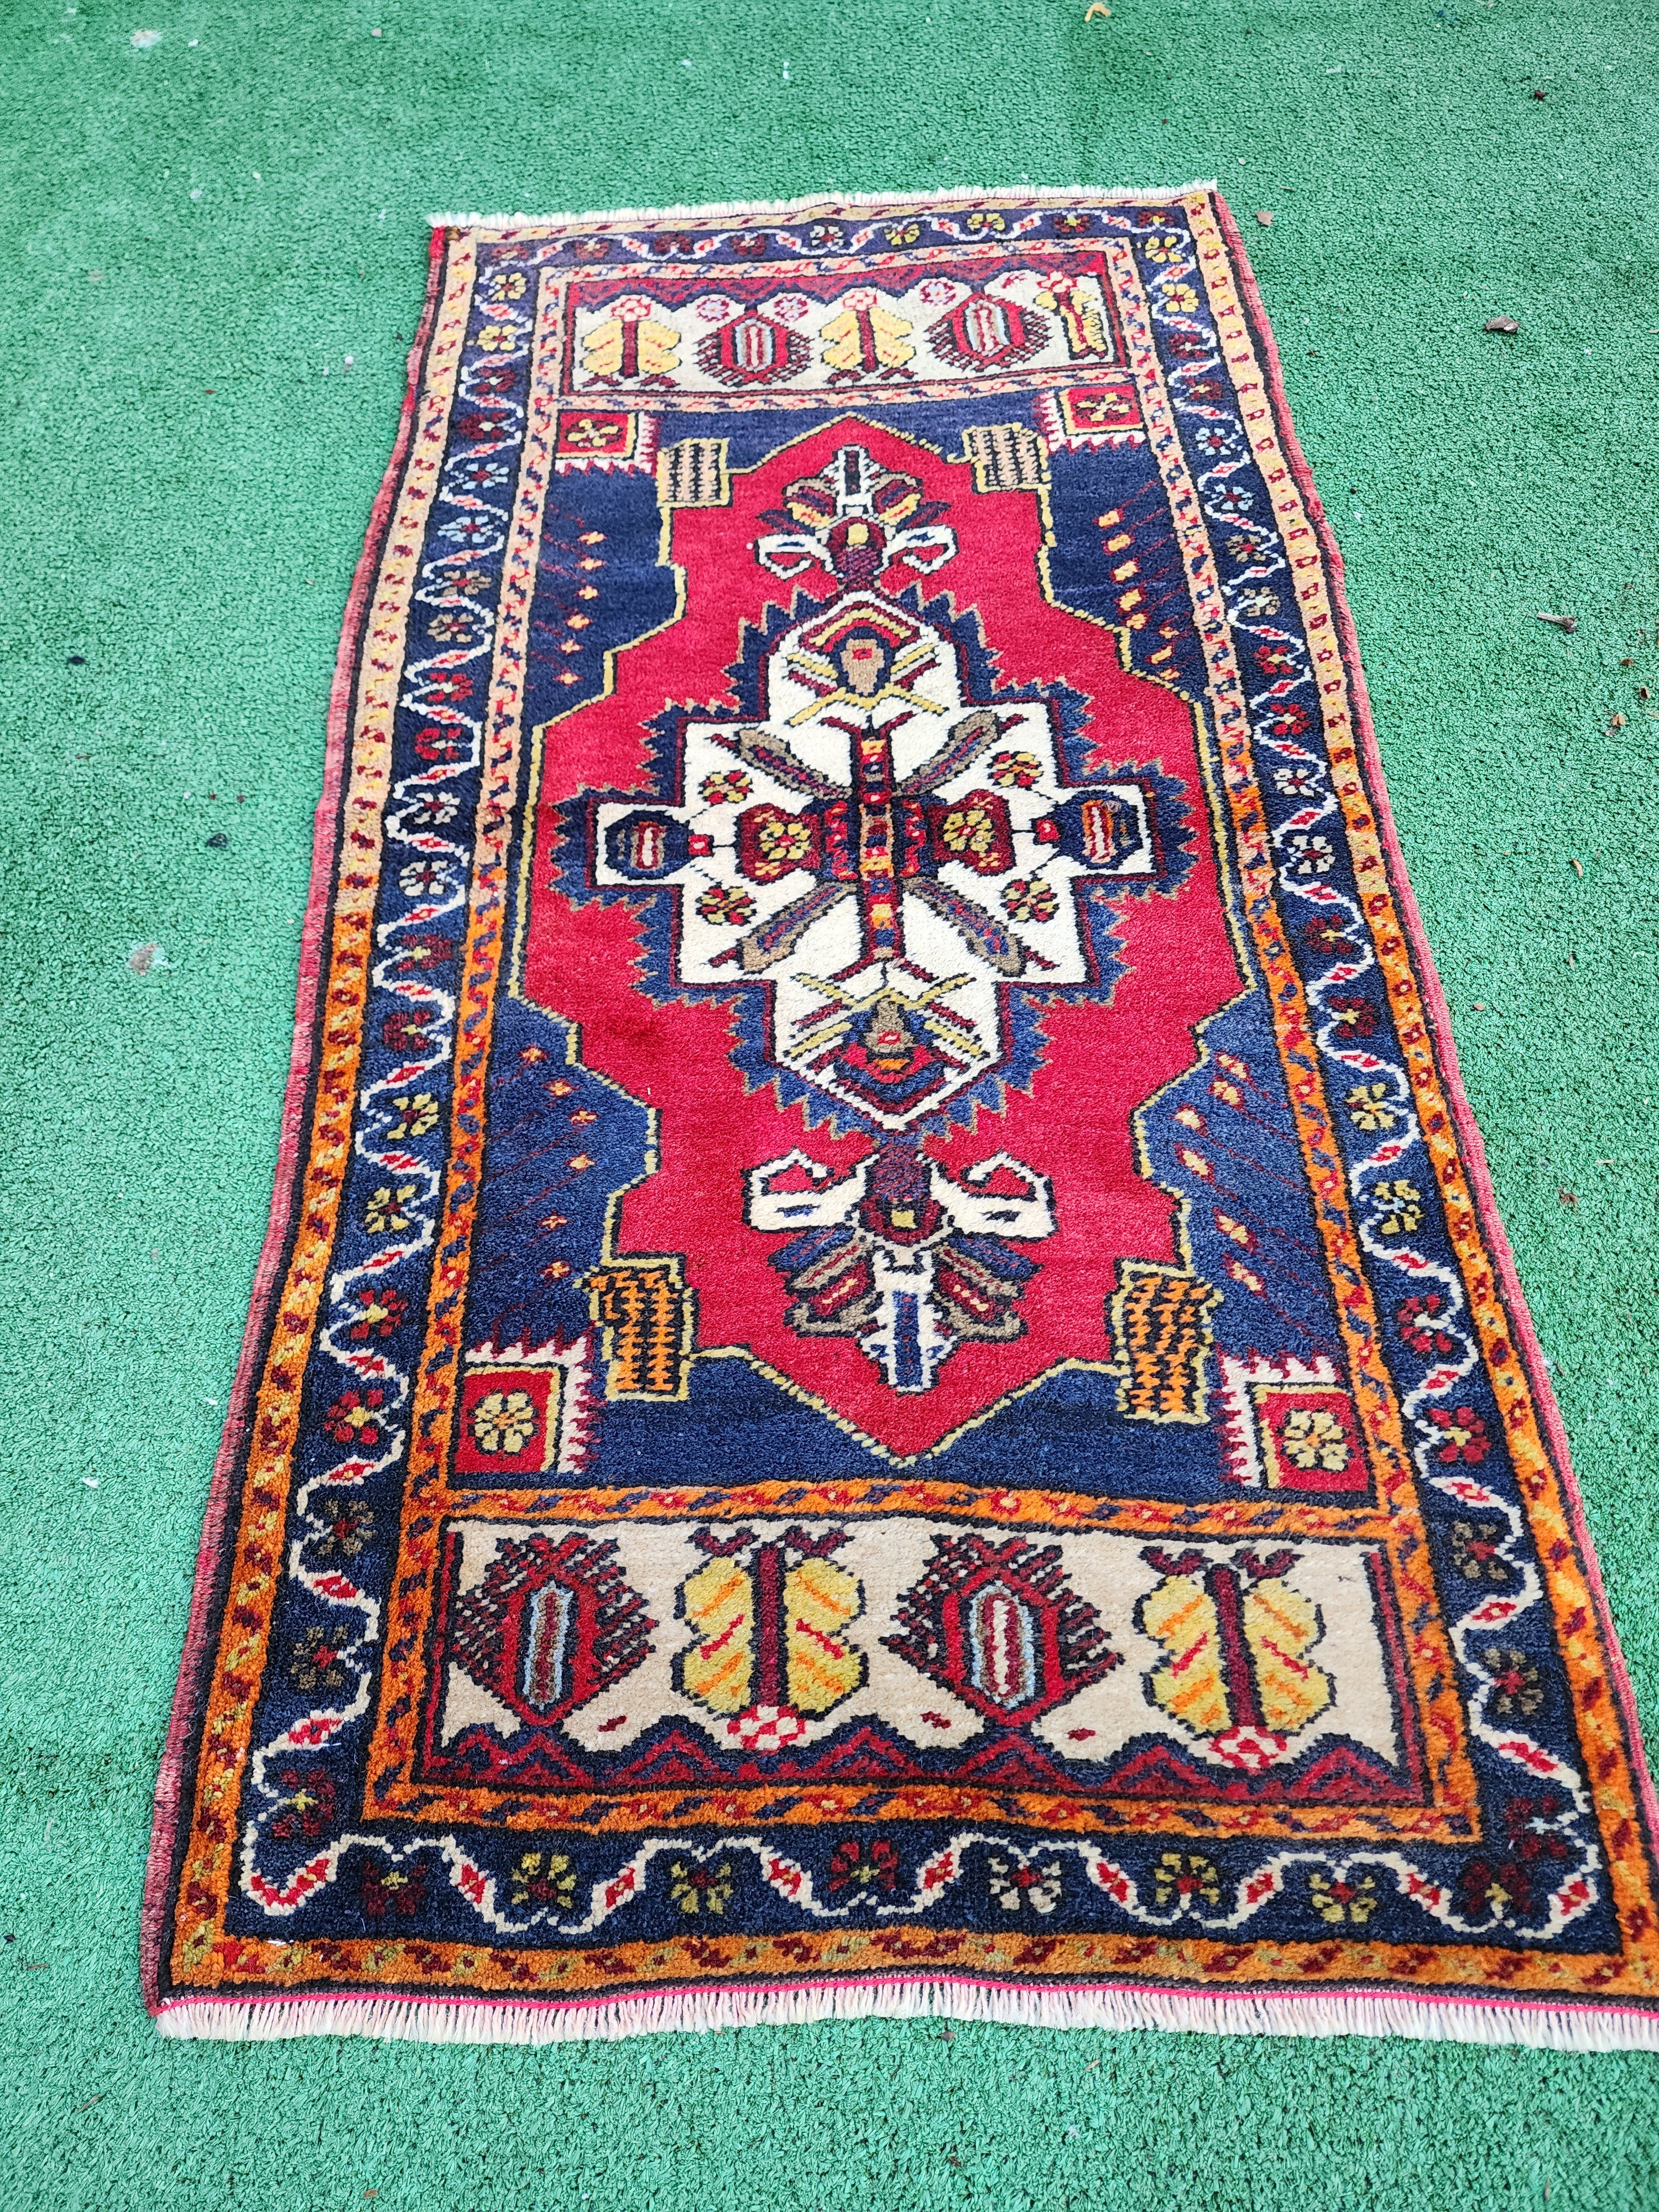 Vintage Turkish Small Rug, 3ft 4 in x 1 ft 8 in, Red, Blue and Beige Faded Distressed Antique Style Mat